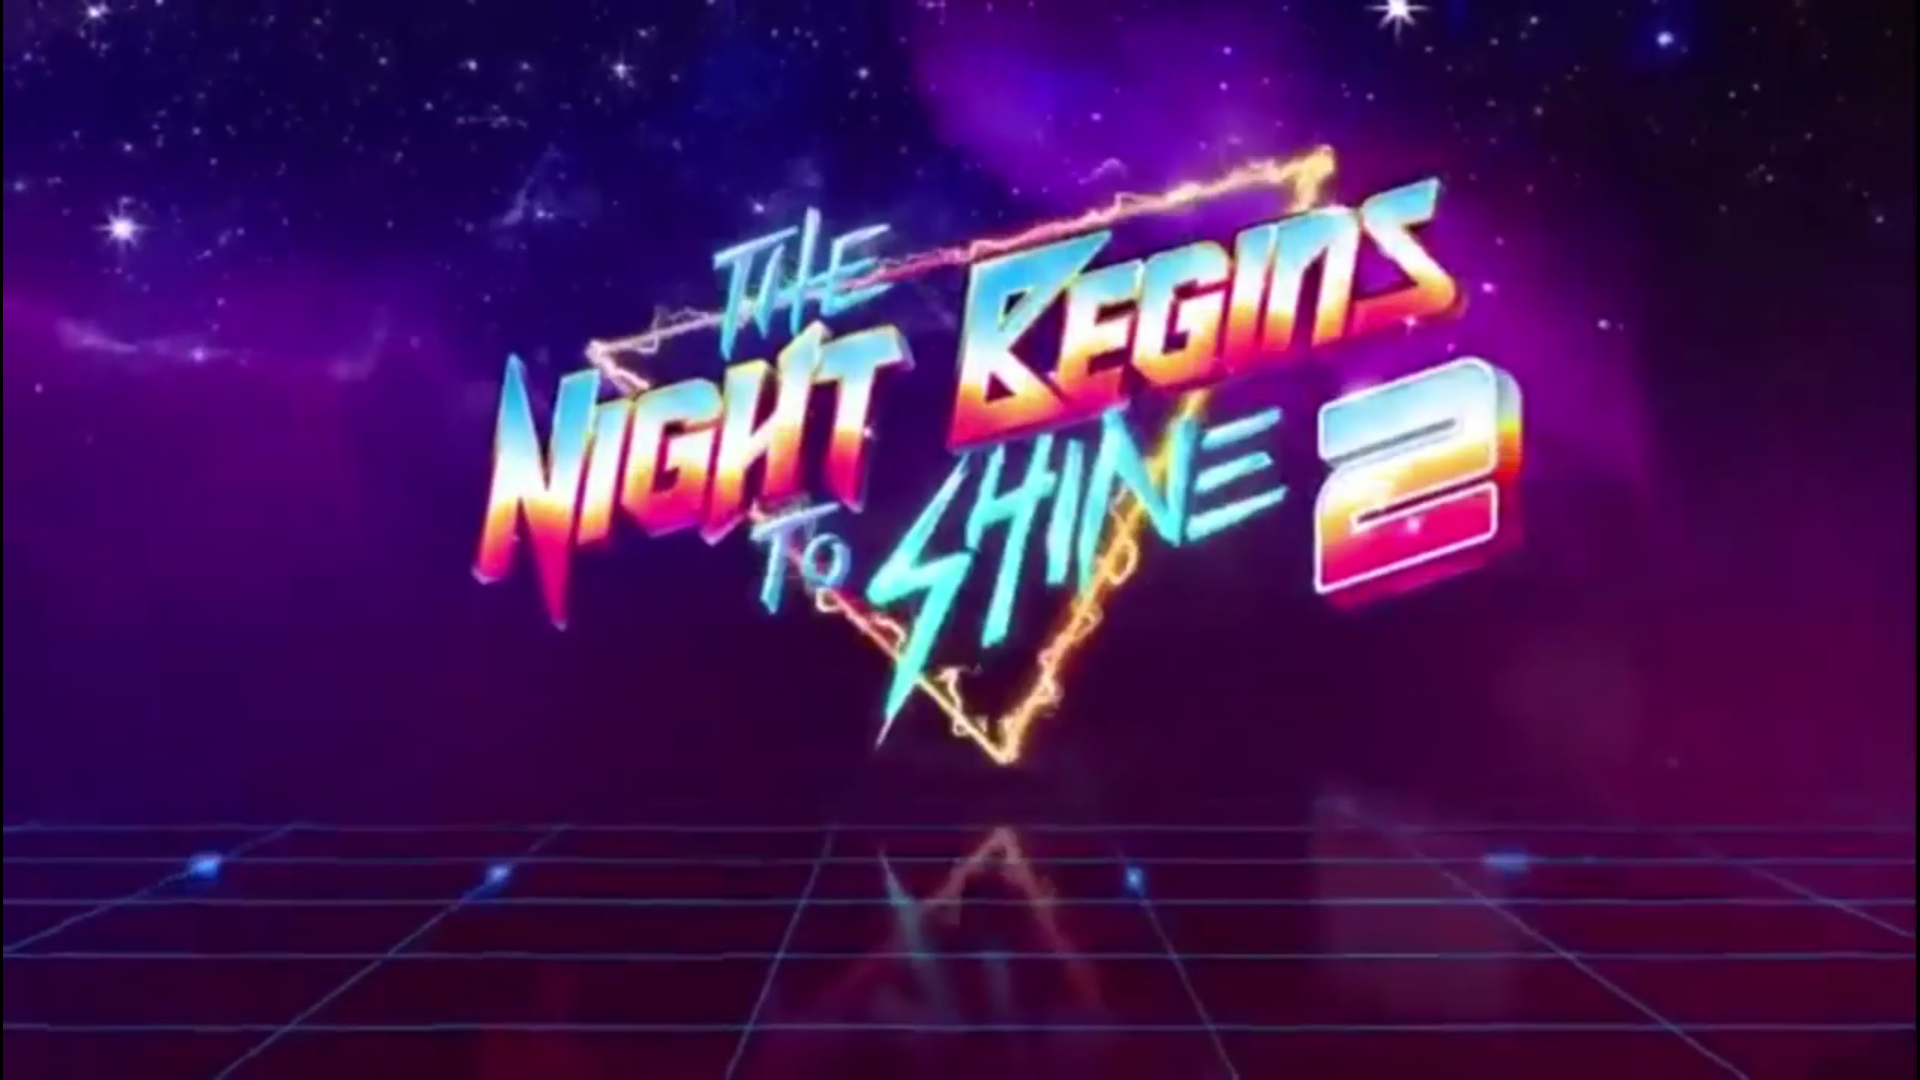 The Night Begins to Shine 2: You're The One. Teen Titans Go!